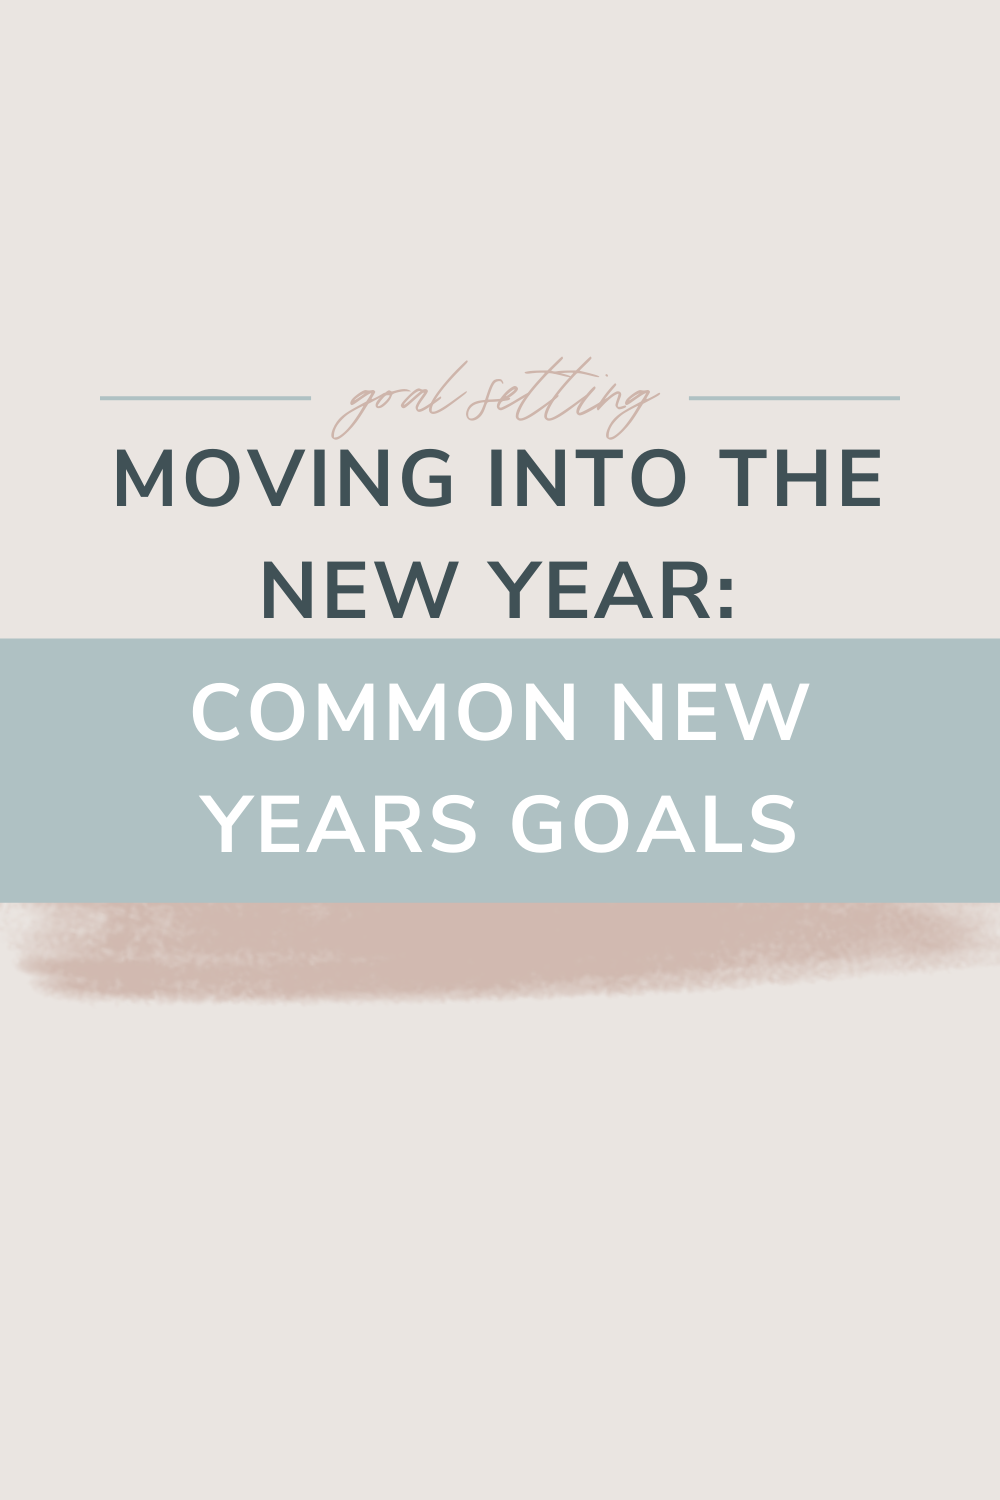 Moving Into the New Year: Common New Years Goals | Feeling stuck with your goals? Unsure how to get started? Curious how to enhance your goals or what areas you might be missing? Check out this blog for some fresh ideas on goals to set in 2021, cheers!